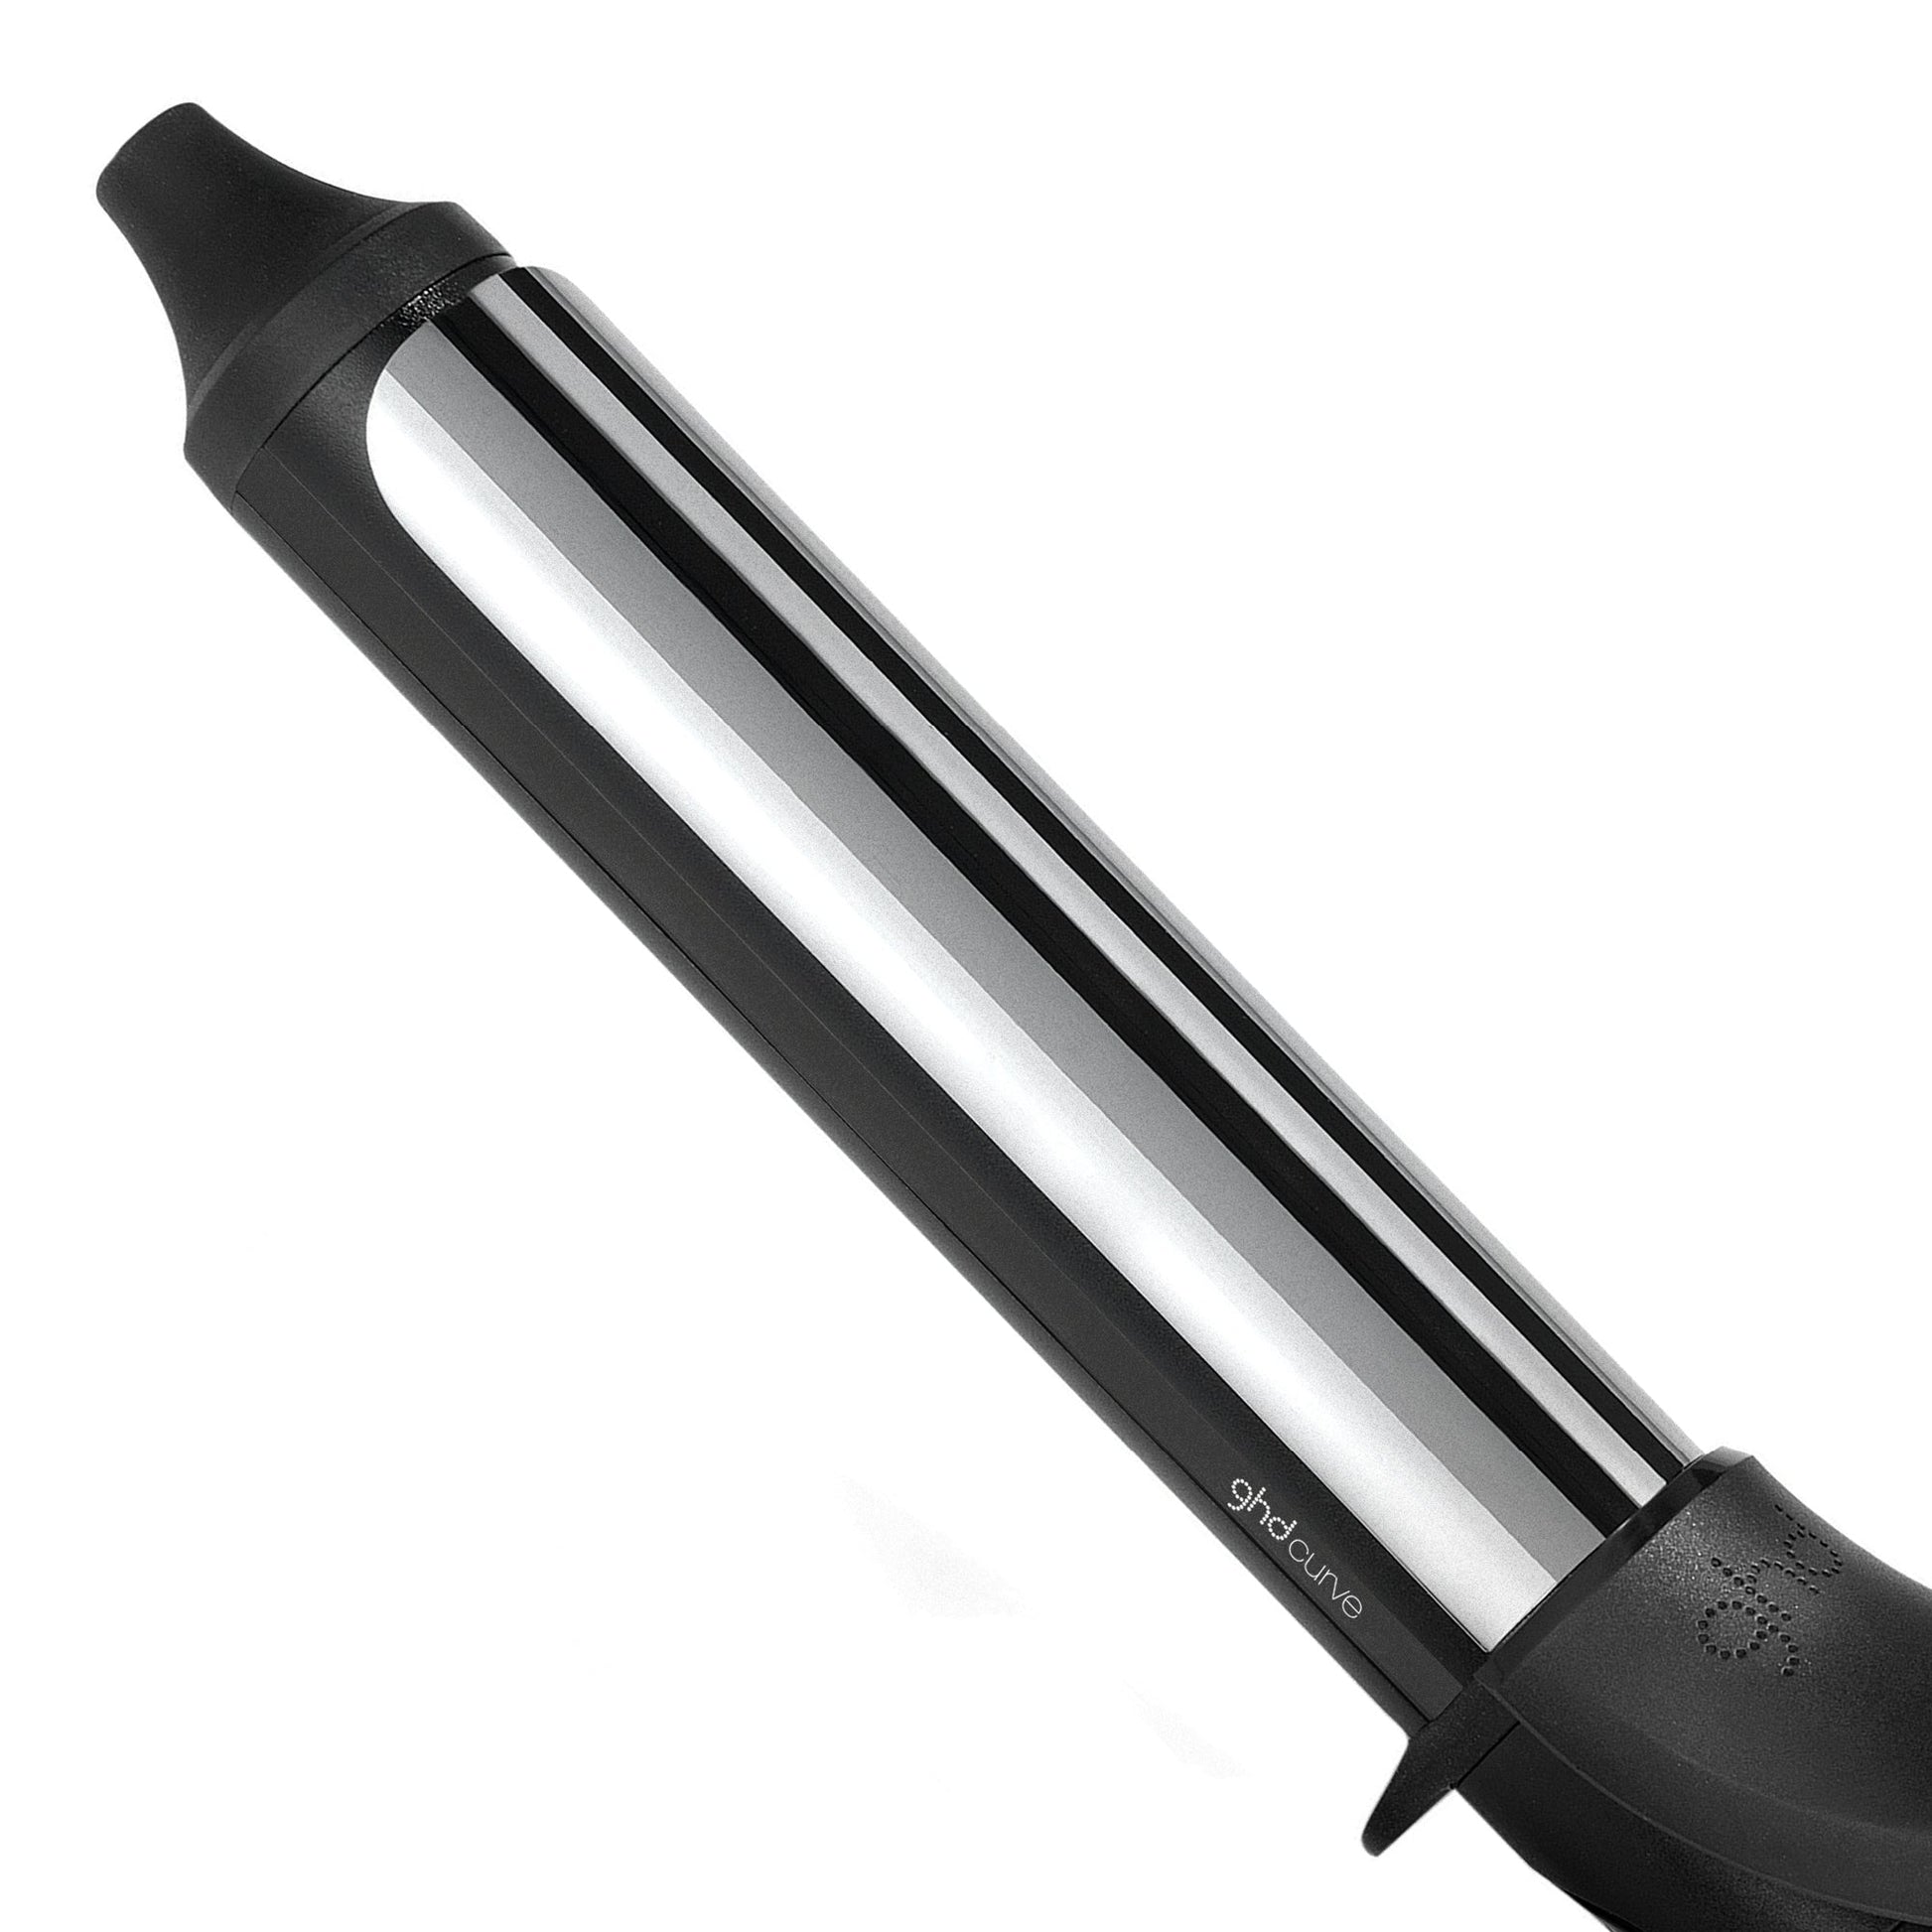 GHD Curve Classic Curl Tong - shelley and co